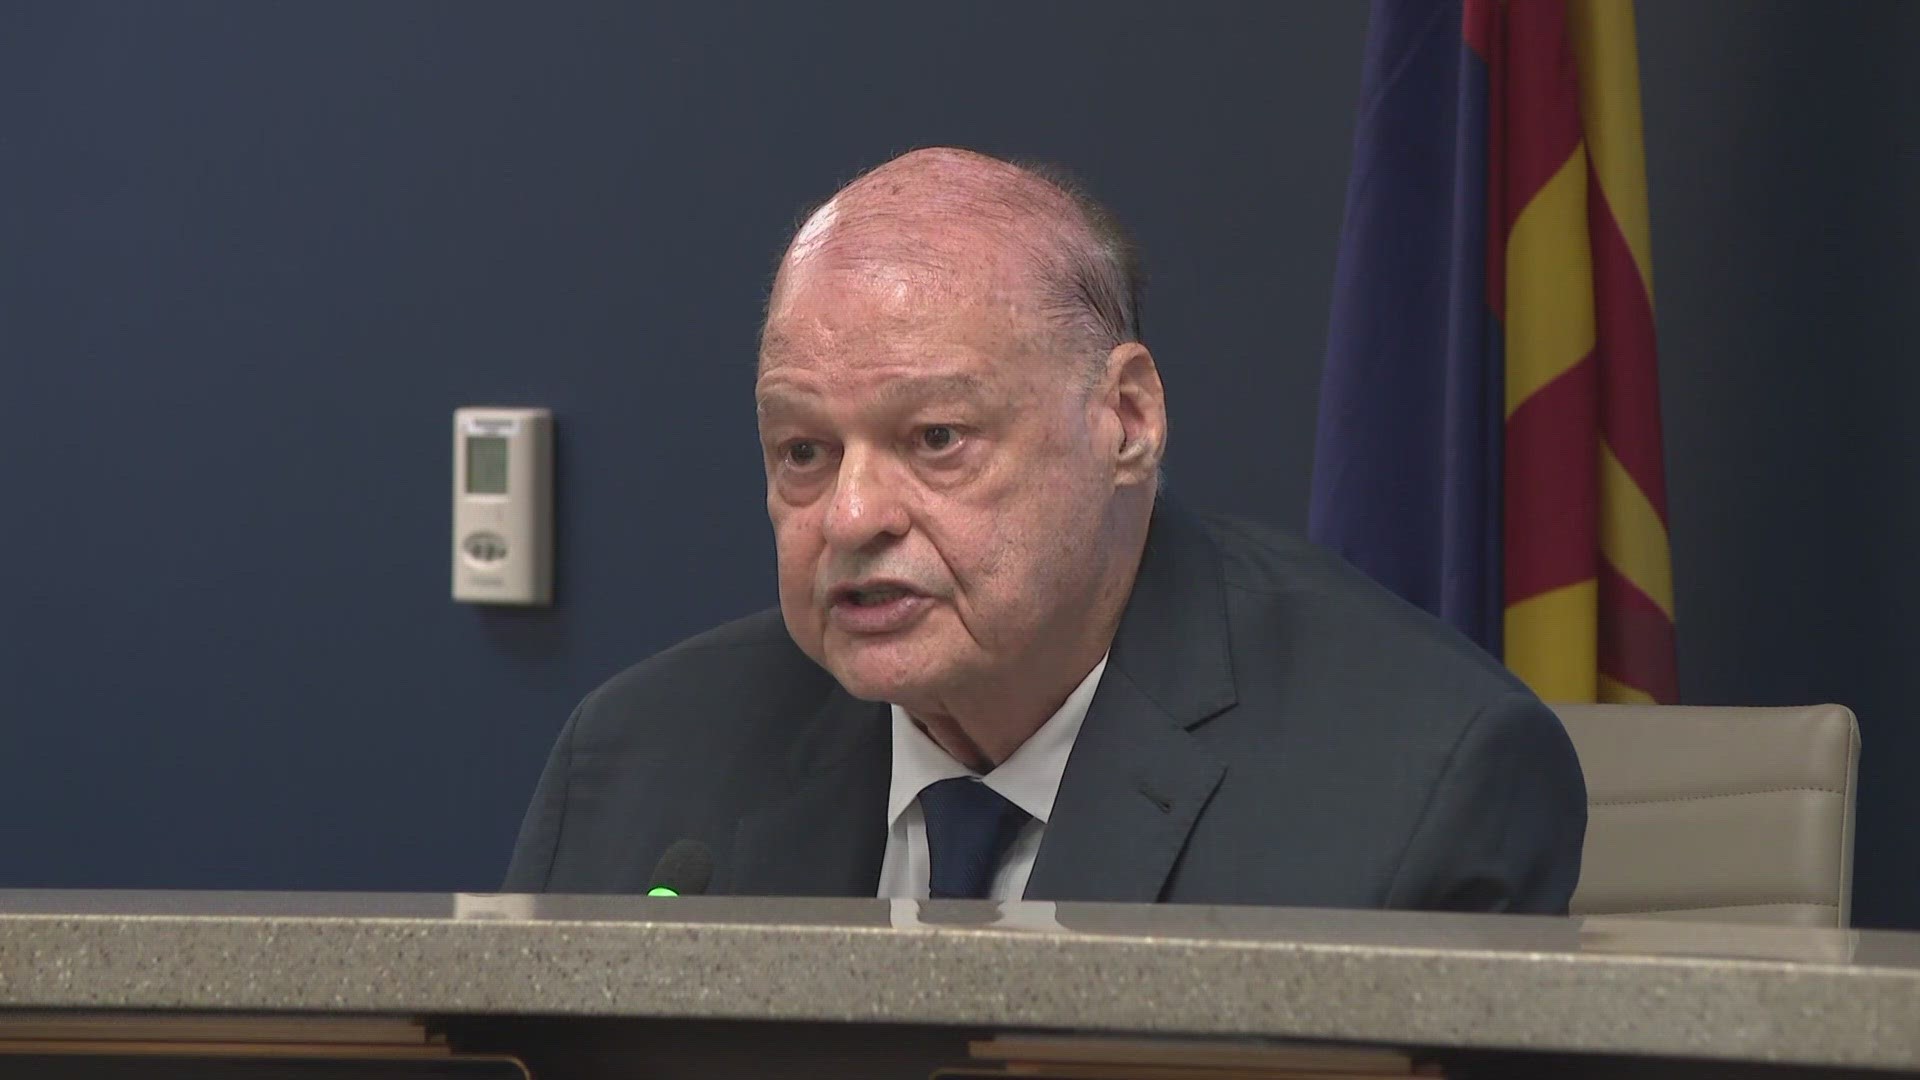 Superintendent Tom Horne is threatening to pull funding from schools that allow non-proficient English speaking students take part in dual-language classes.